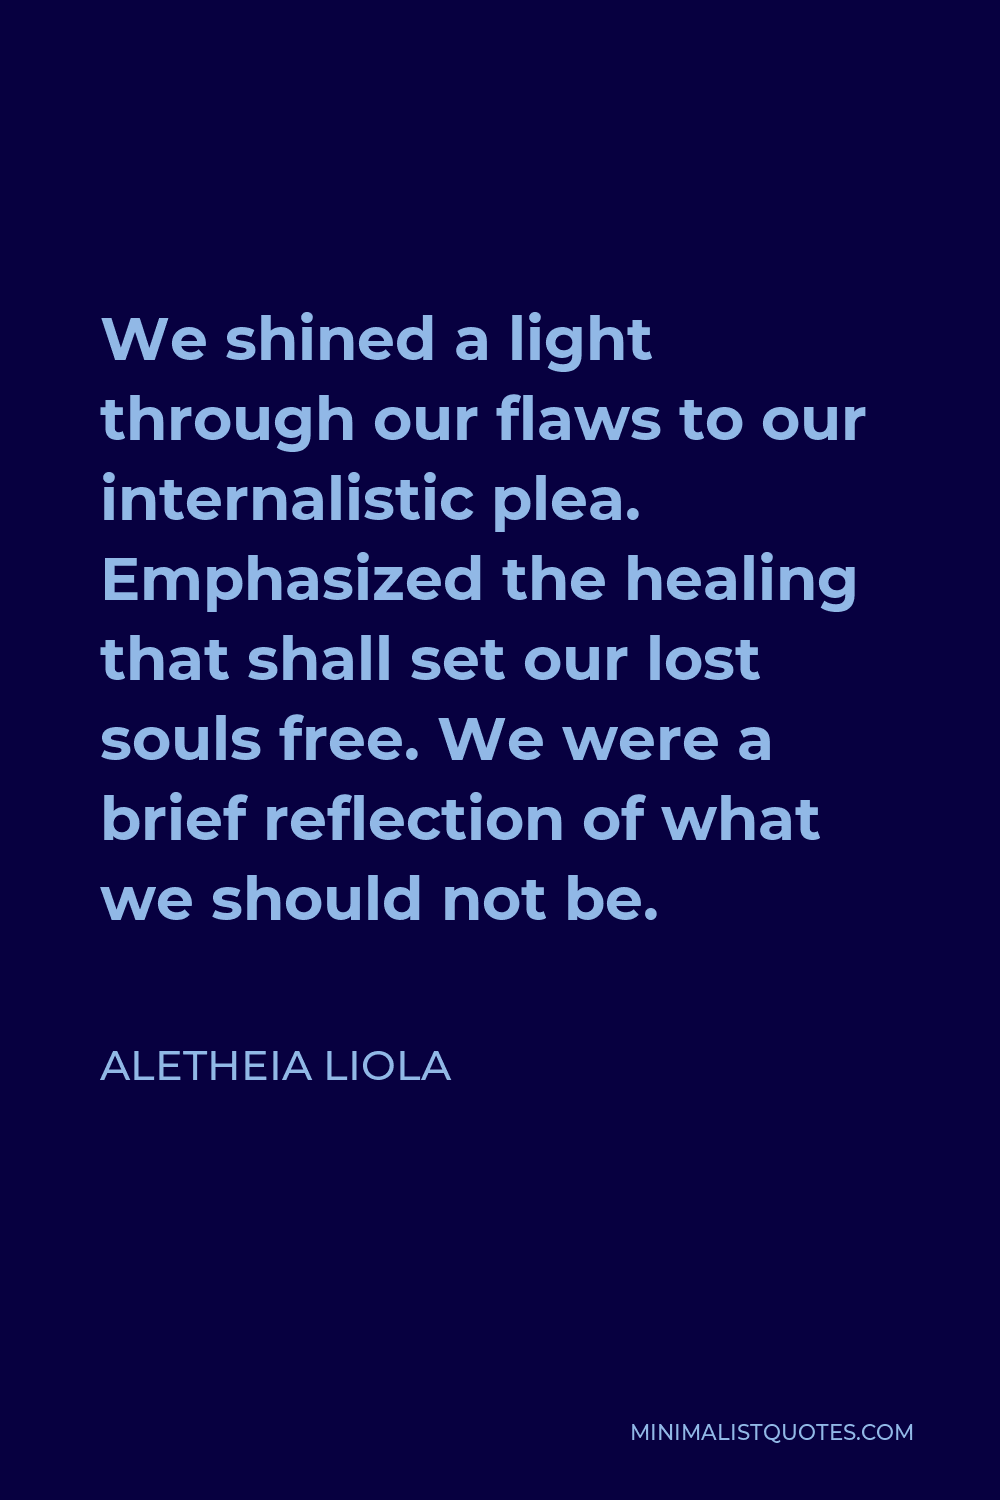 Aletheia Liola Quote - We shined a light through our flaws to our internalistic plea. Emphasized the healing that shall set our lost souls free. We were a brief reflection of what we should not be.